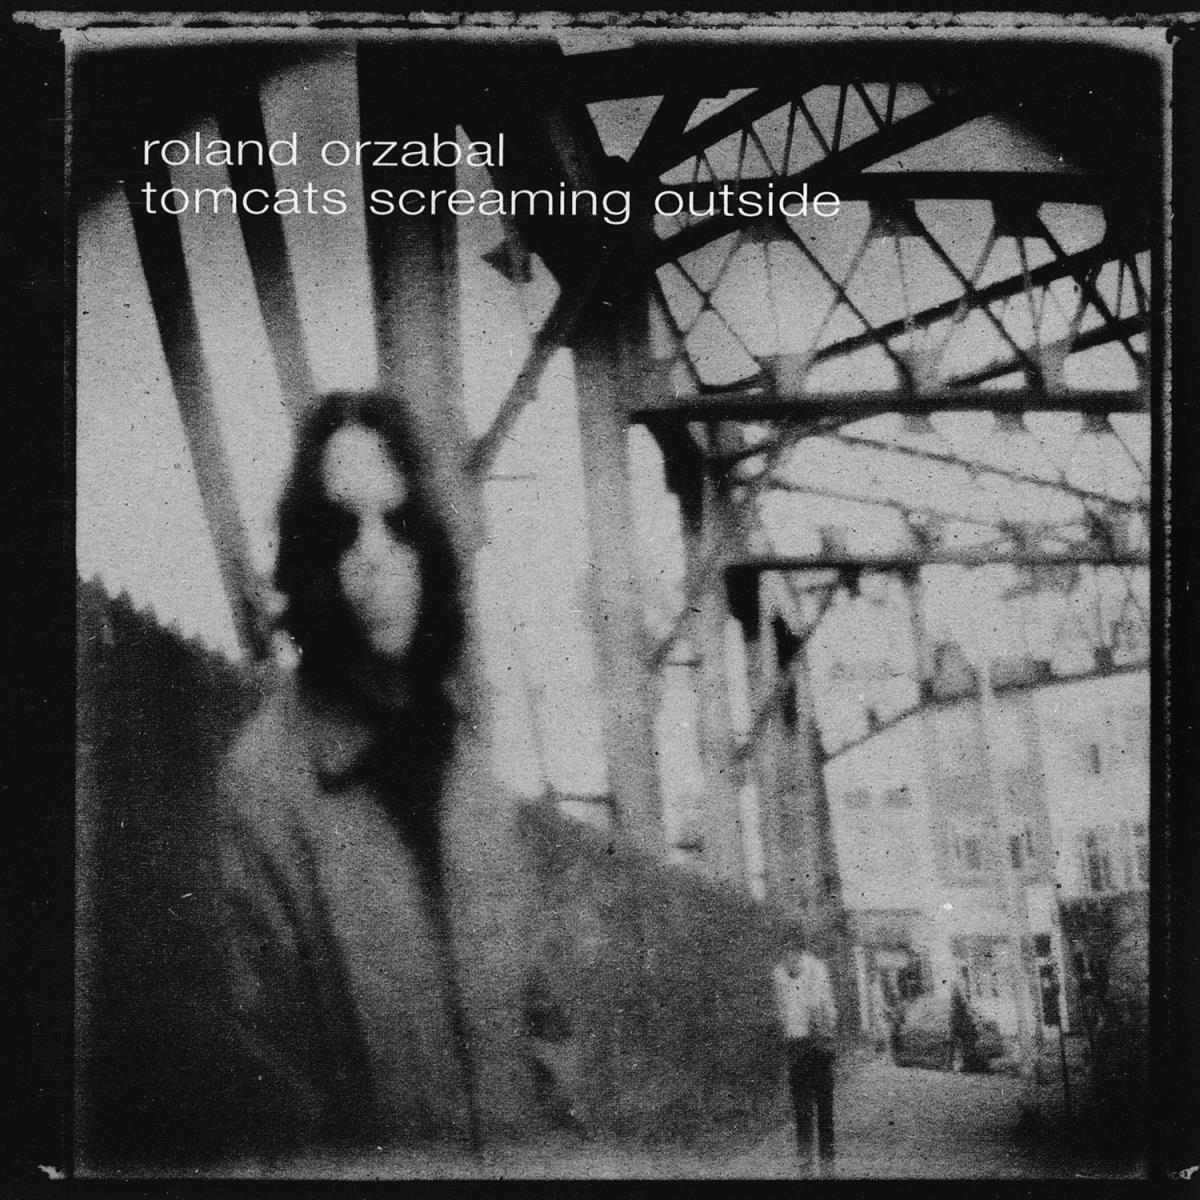 <p>Orzabal dropped the Tears For Fears moniker and released his first project under his own name in 2001. The album, titled <a href="https://www.allmusic.com/album/tomcats-screaming-outside-mw0000012043" class="CMY_Link CMY_Valid"><em>Tomcats Screaming Outside</em></a>, was praised for its lyrical and sonic attributes, with one reviewer noting the way it showed how the singer/songwriter was “still ambitious, yes, but not arrogantly so.”</p>